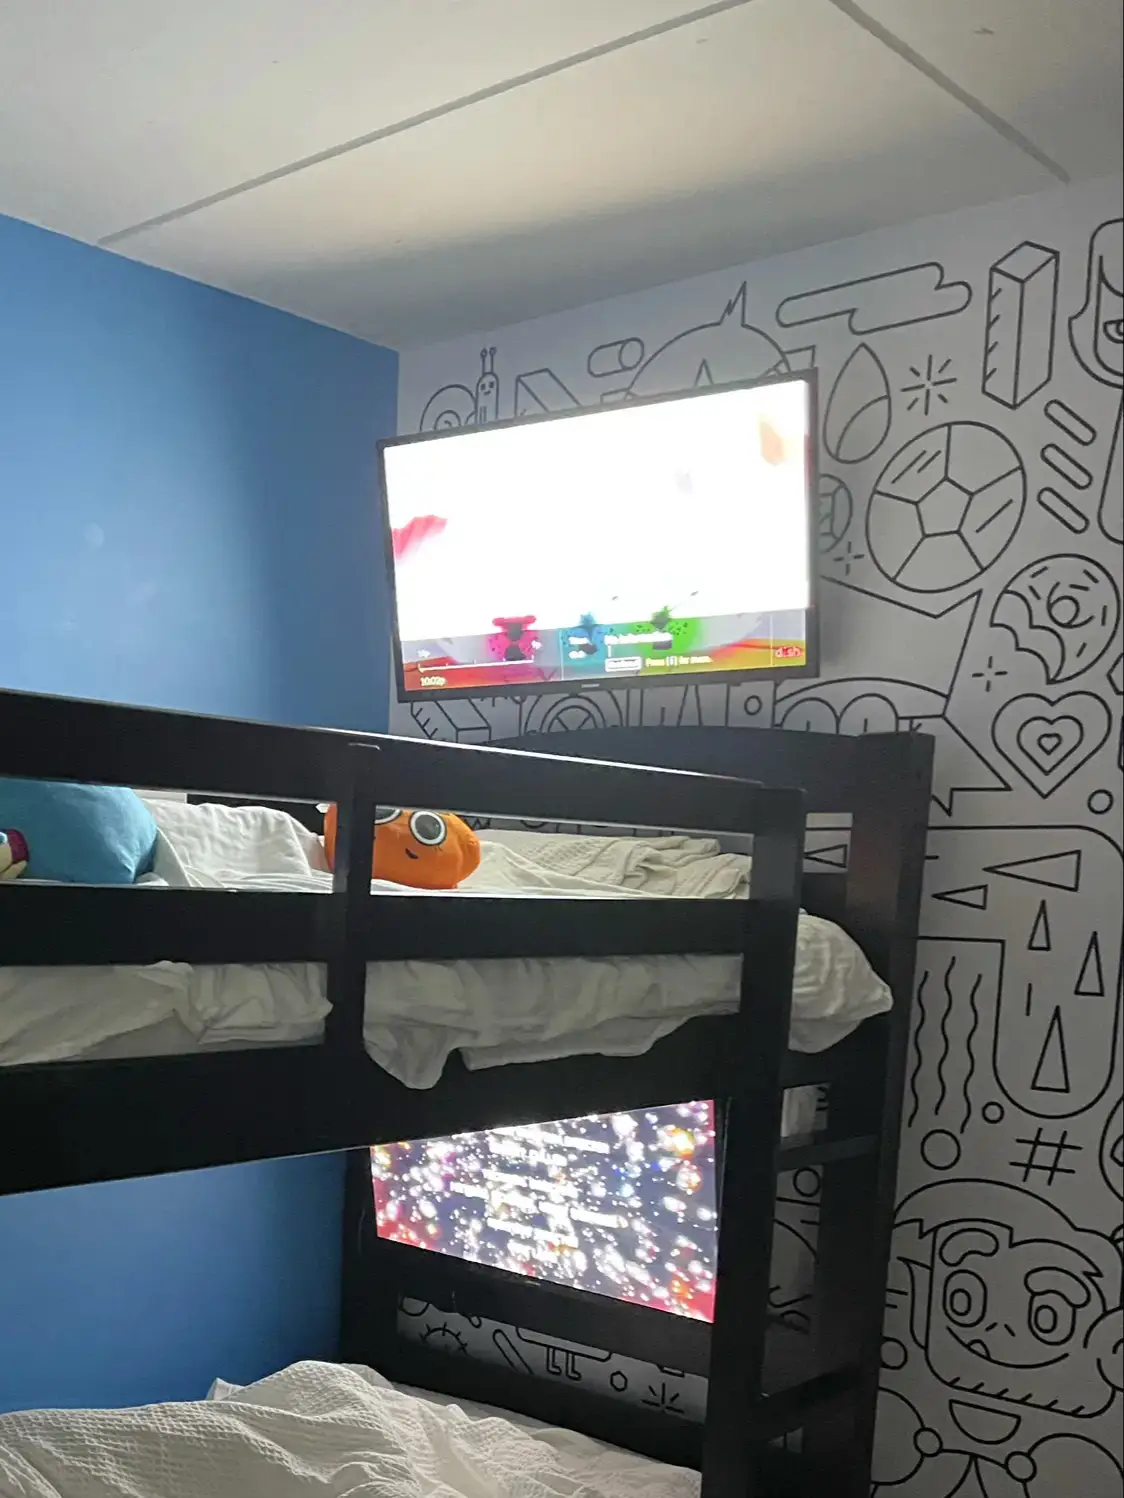  A bedroom with a bed and two TVs.